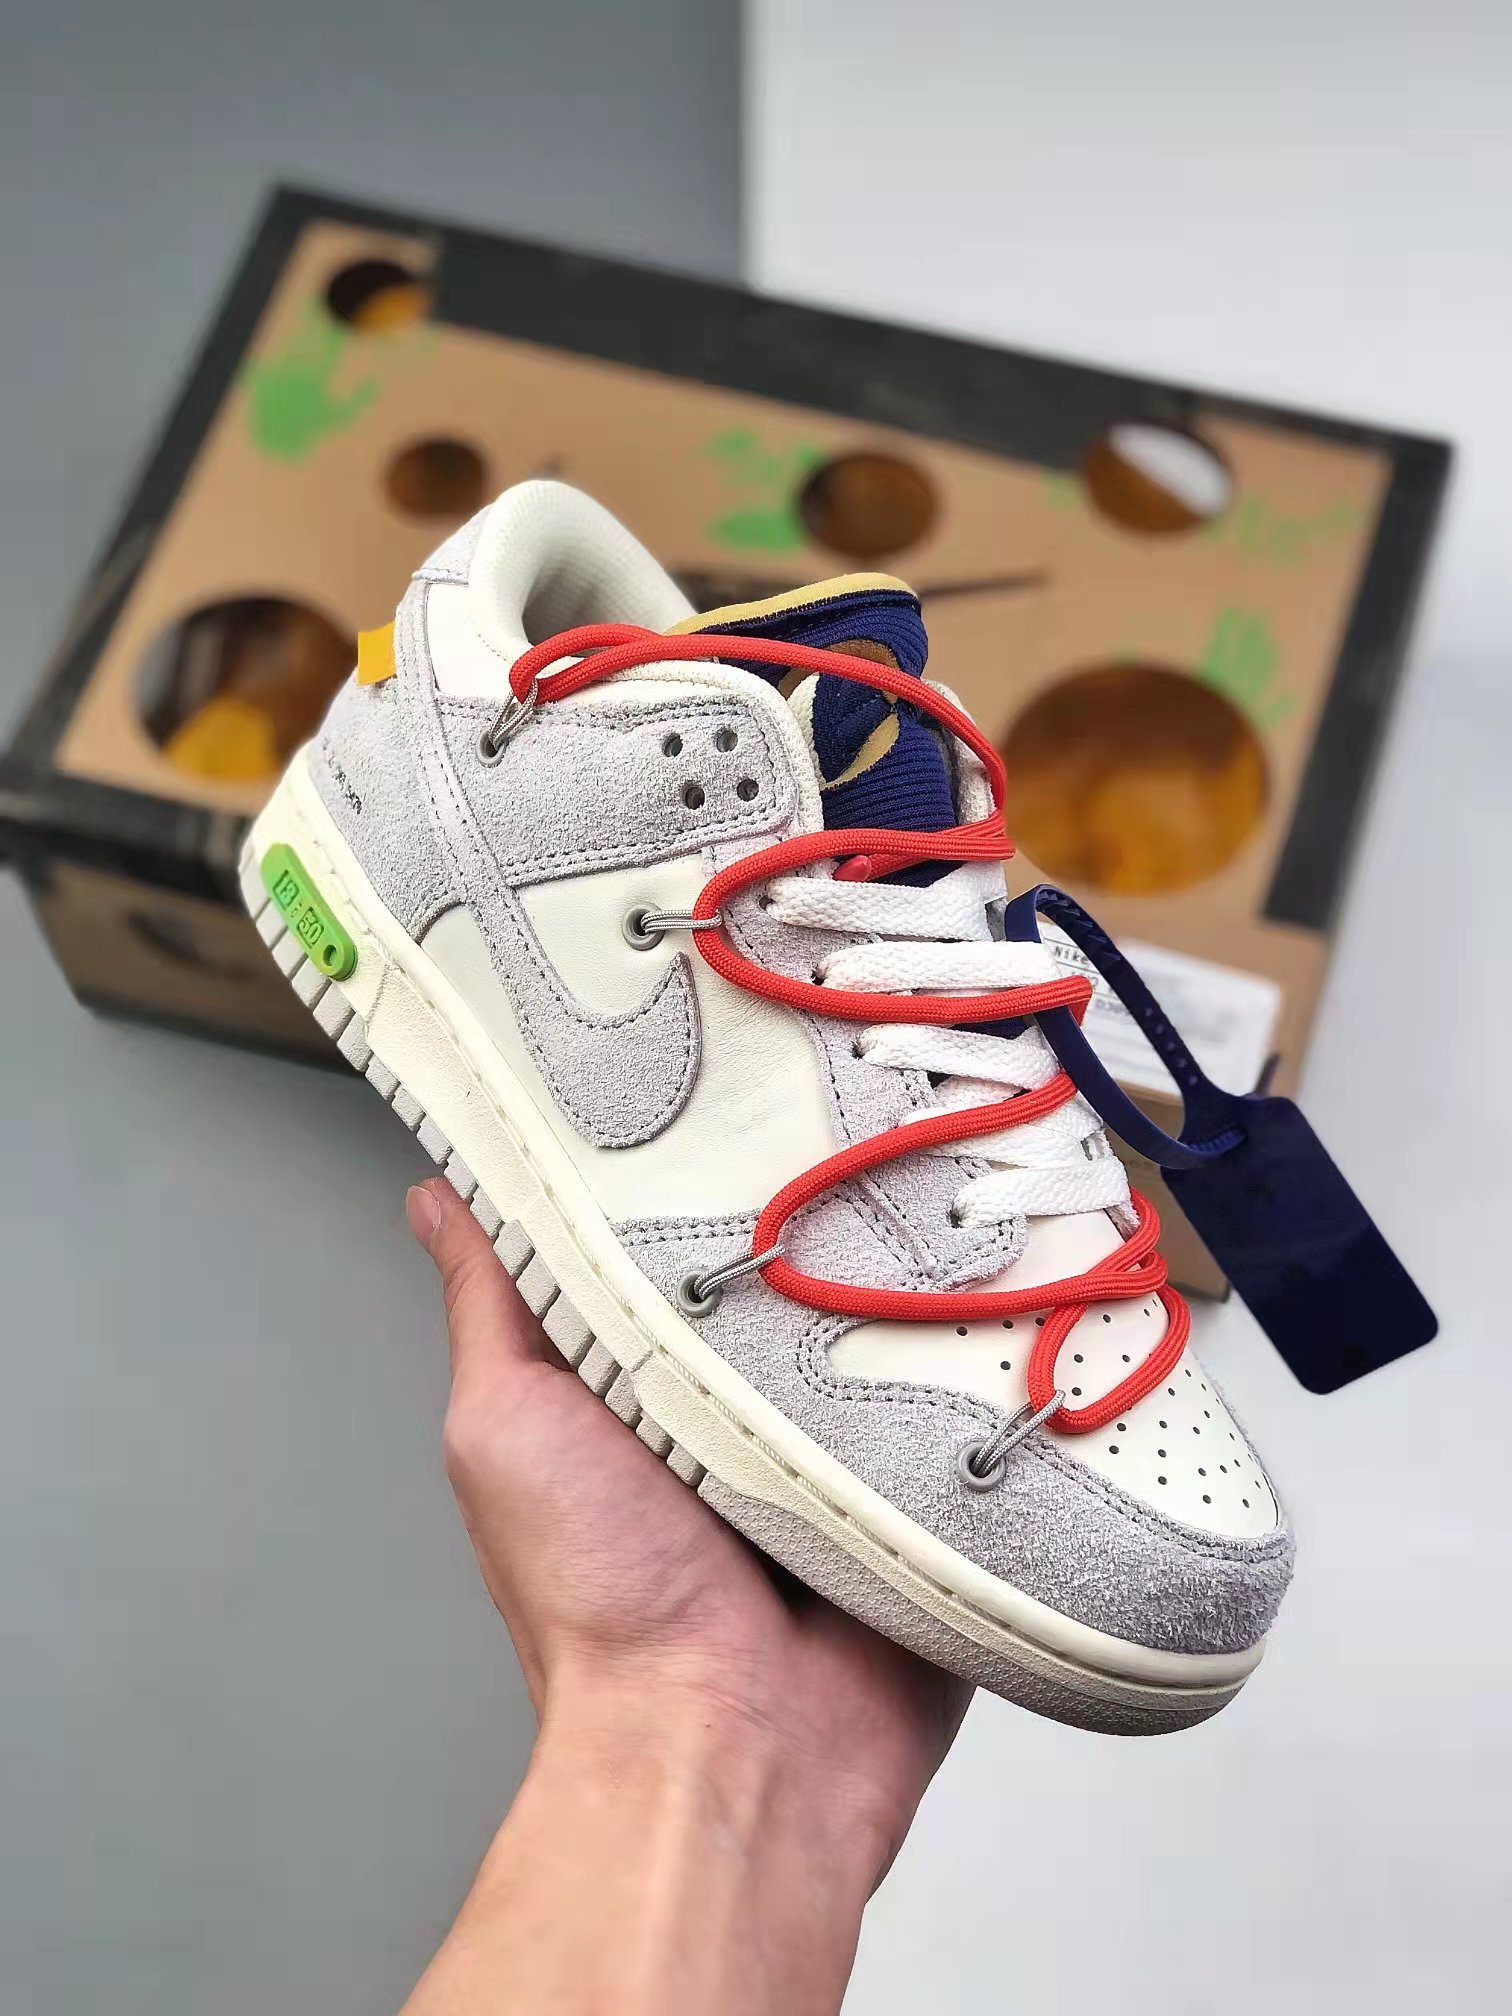 Nike Off-White x Dunk Low 'Lot 13 of 50' DJ0950-110 - Limited Edition Sneakers for Sale